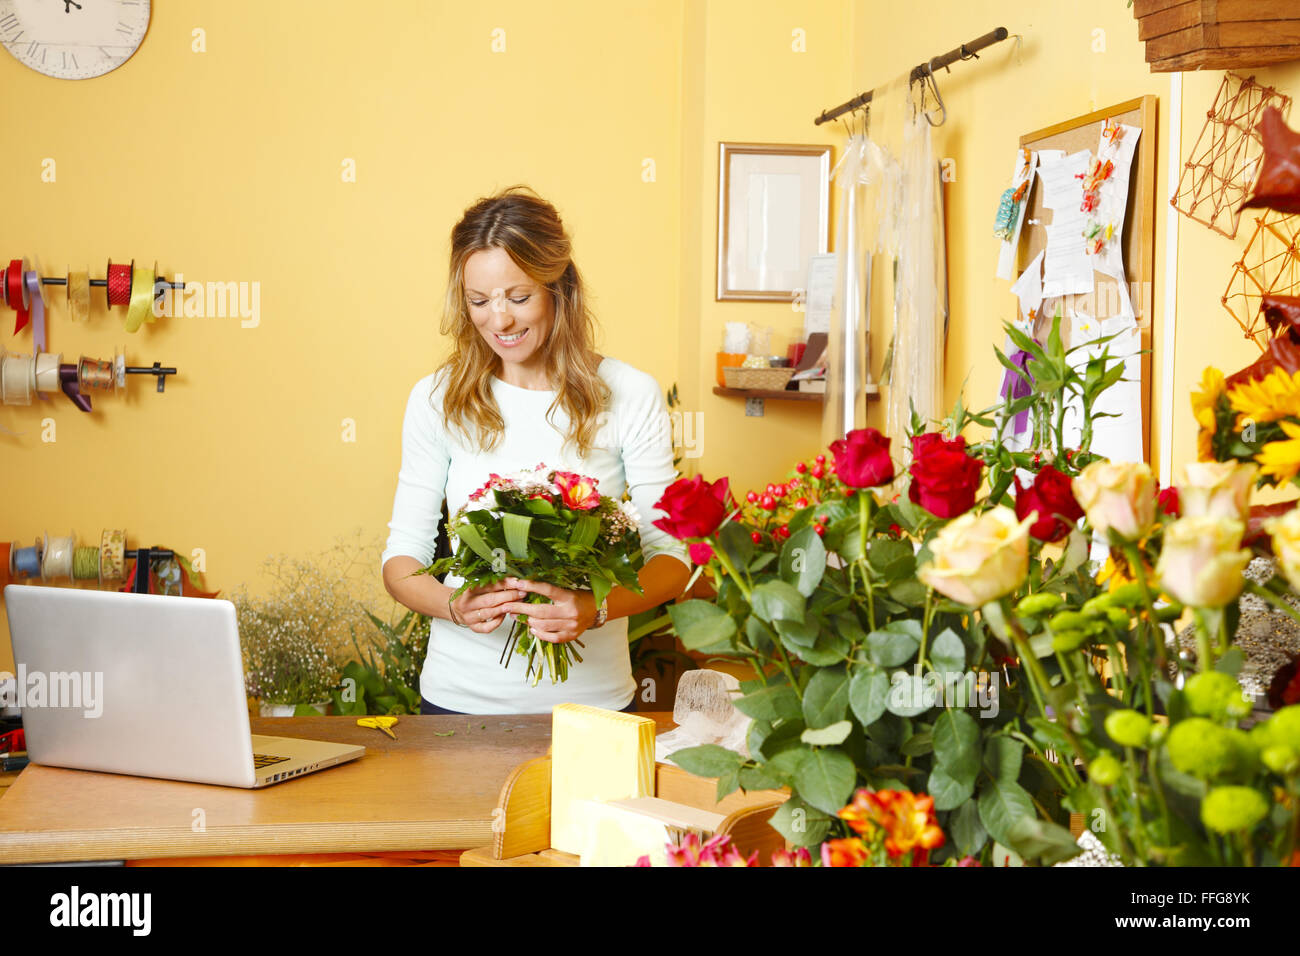 Small business owner. Portrait of mature florist standing in her small flower shop behind the laptop while preparing flowers Stock Photo